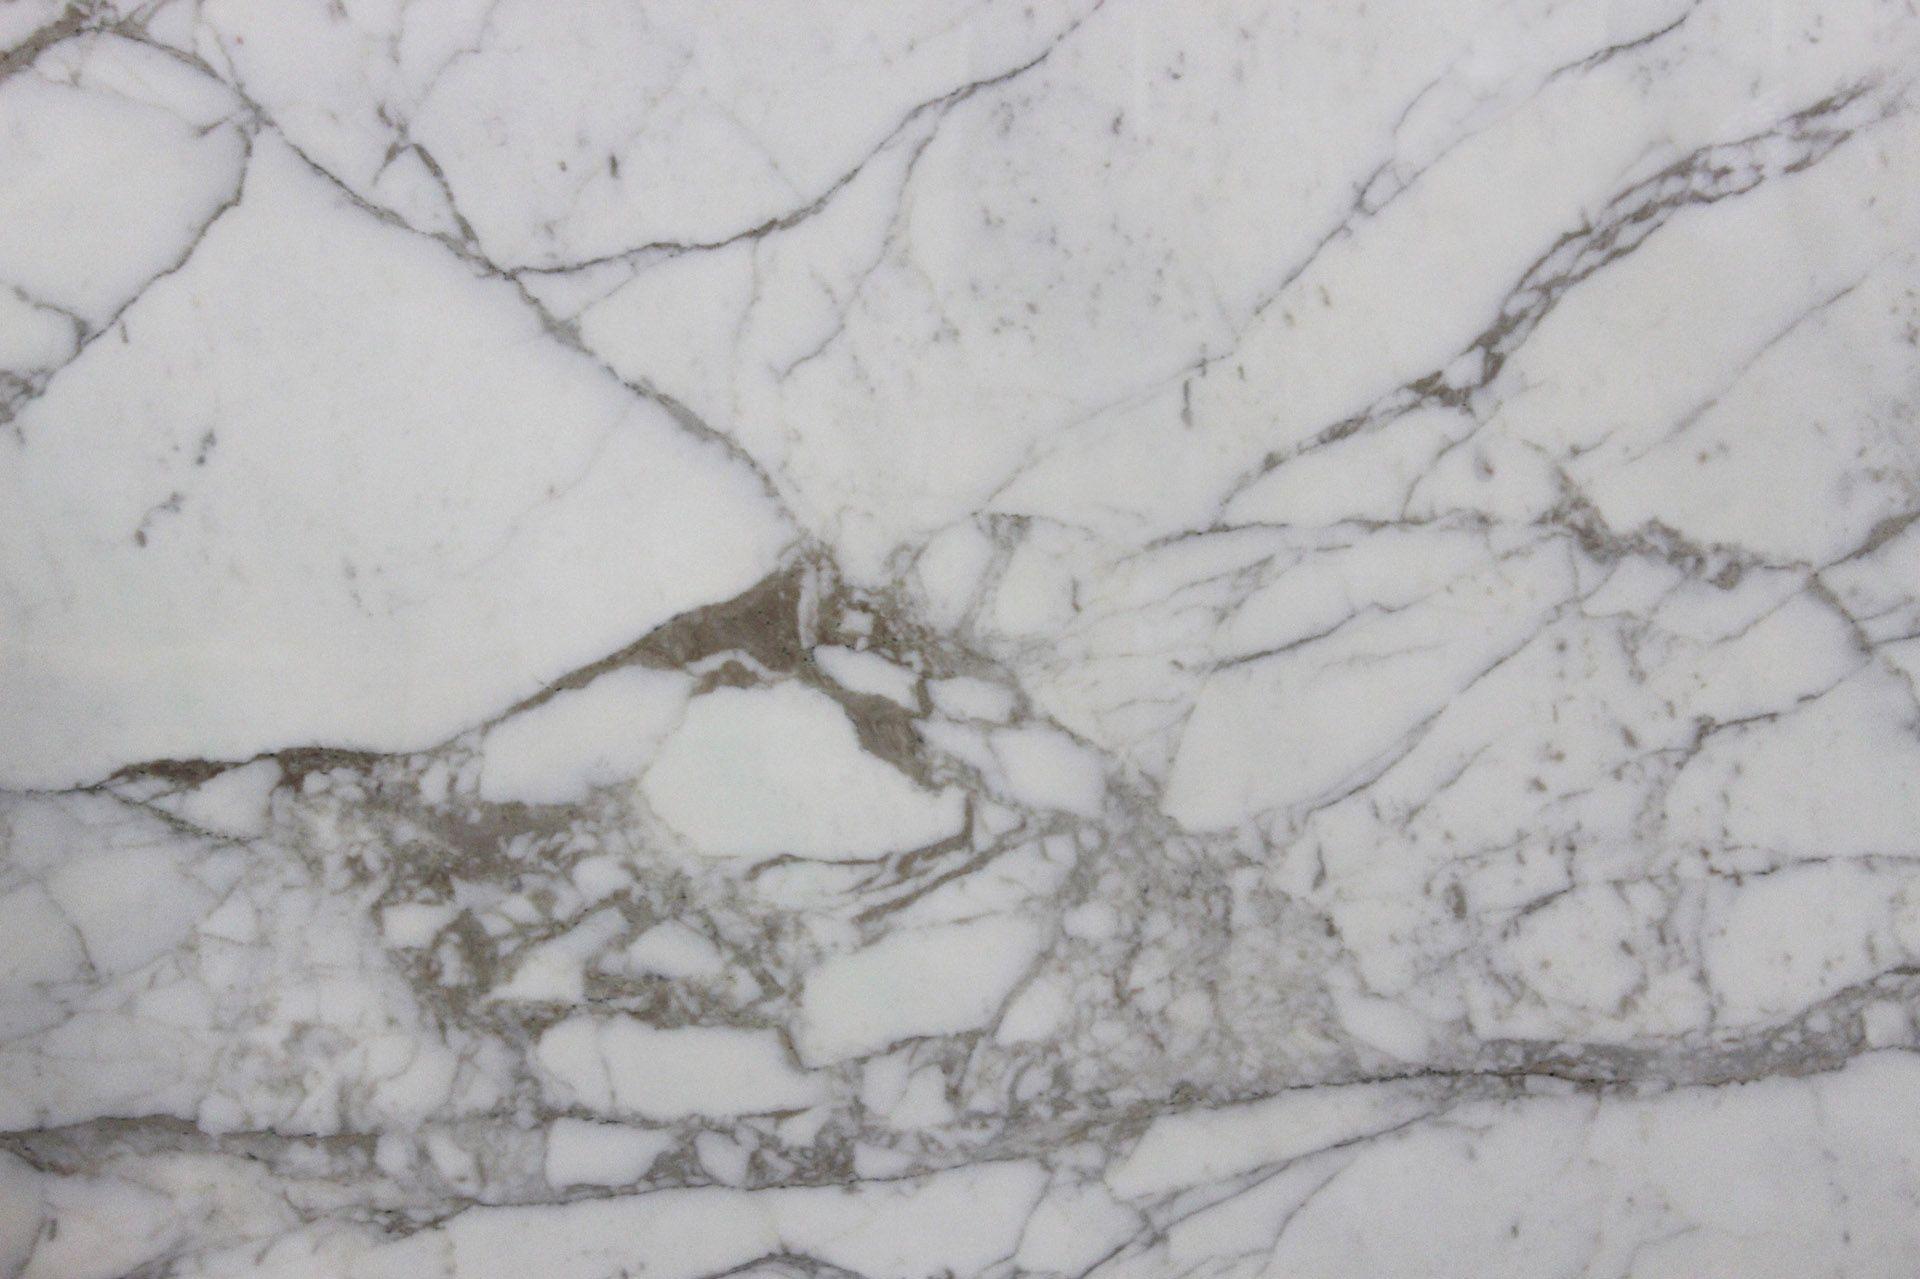 White And Gold Marble Wallpaper